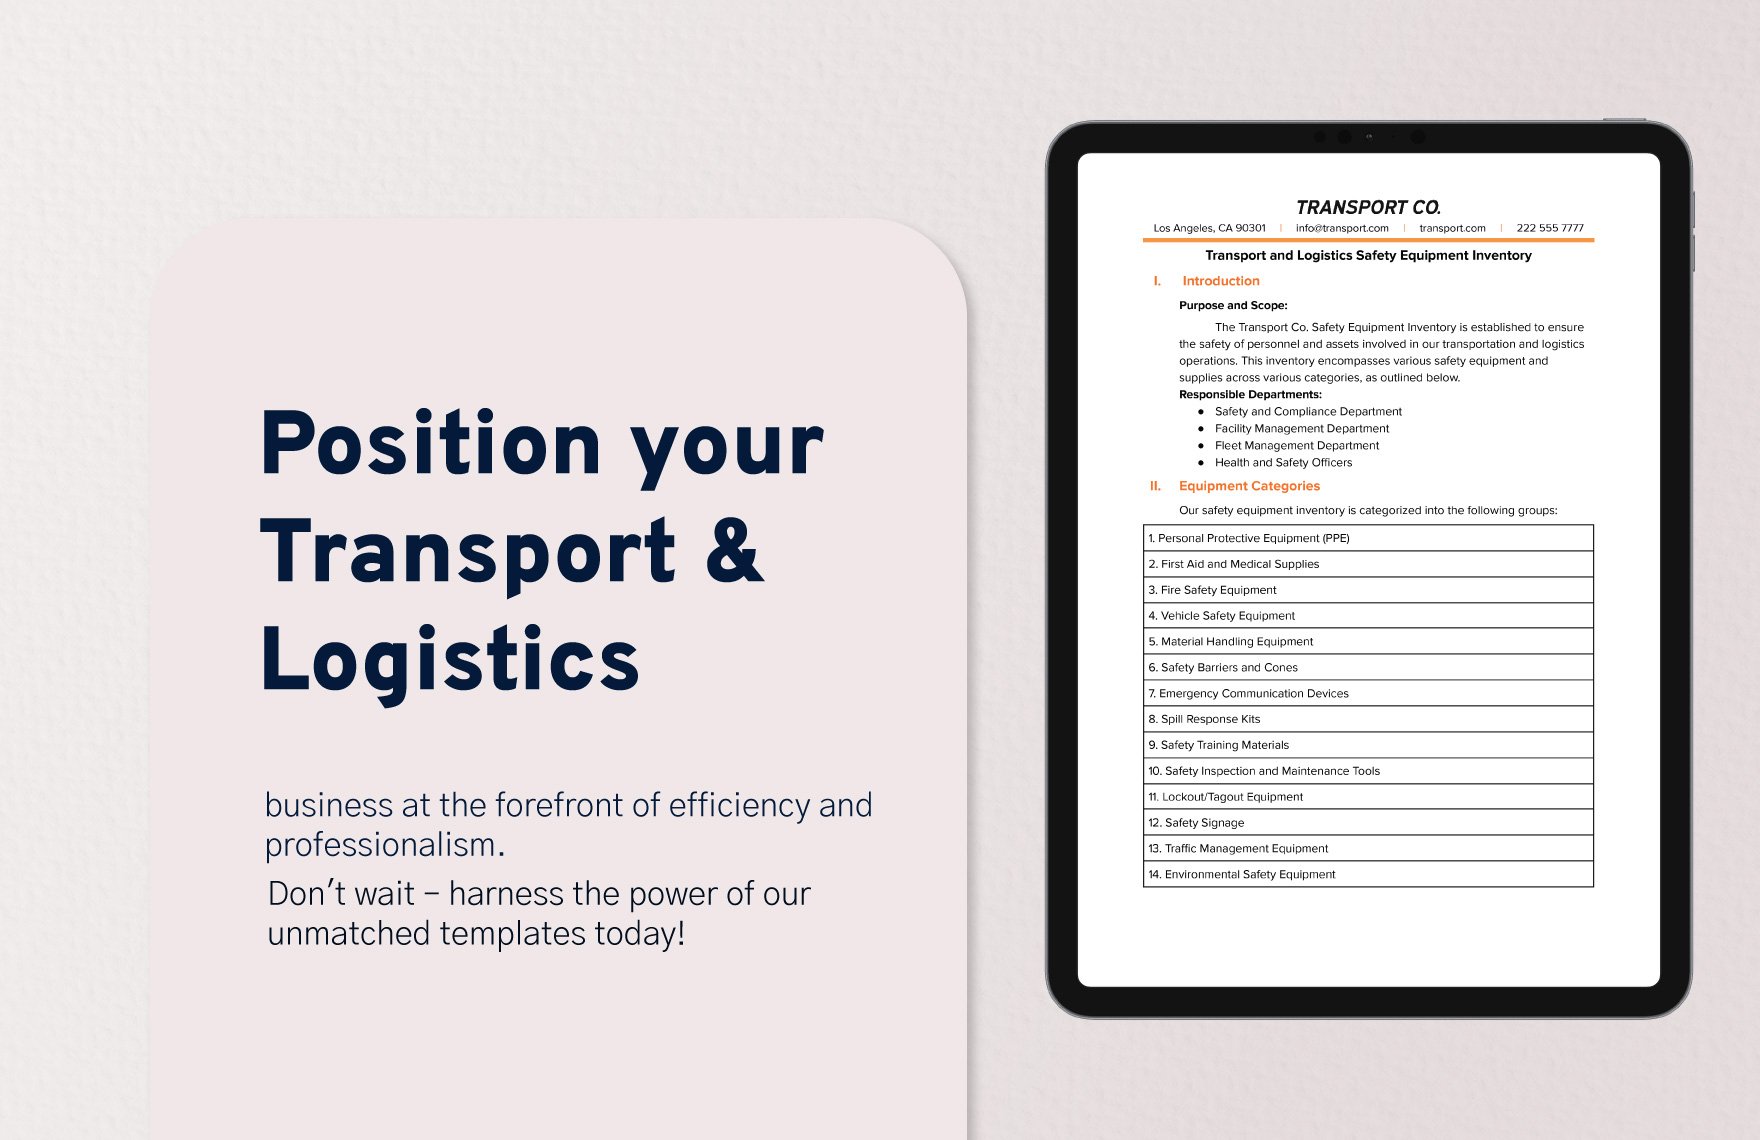 Transport and Logistics Safety Equipment Inventory Template